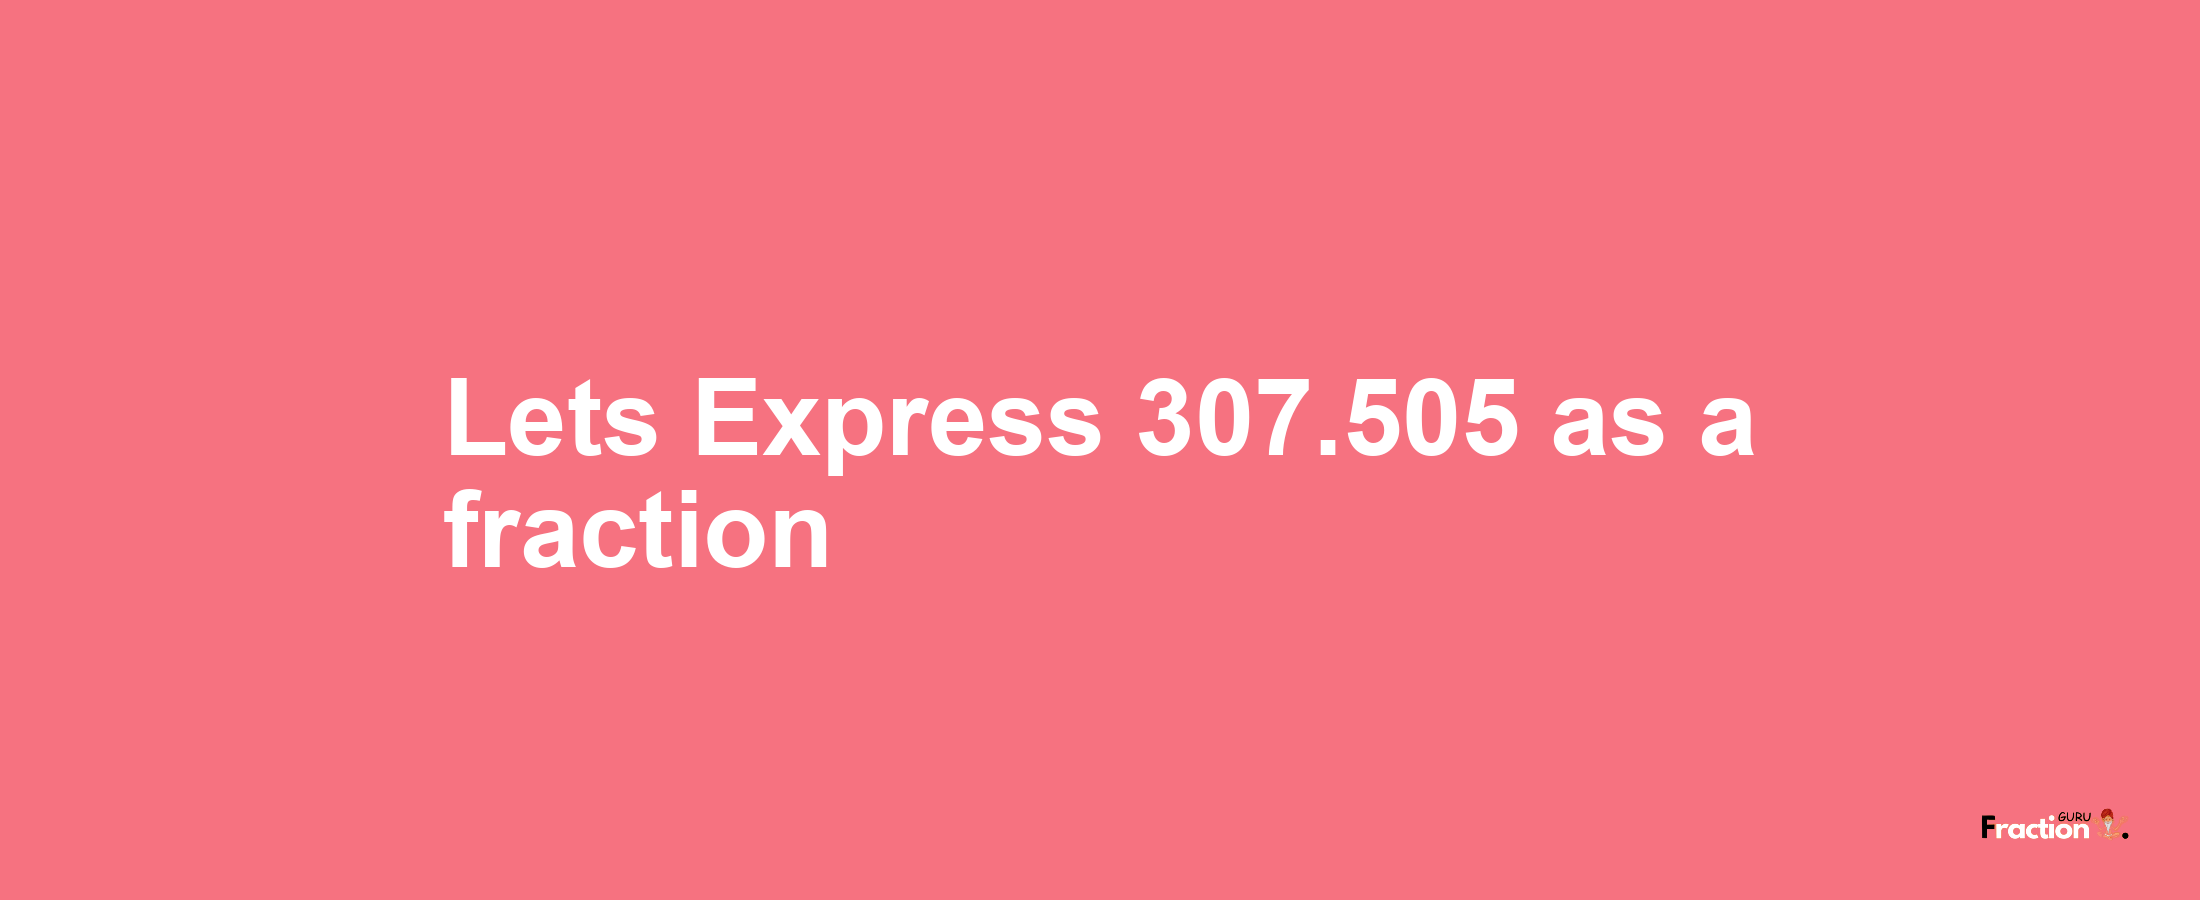 Lets Express 307.505 as afraction